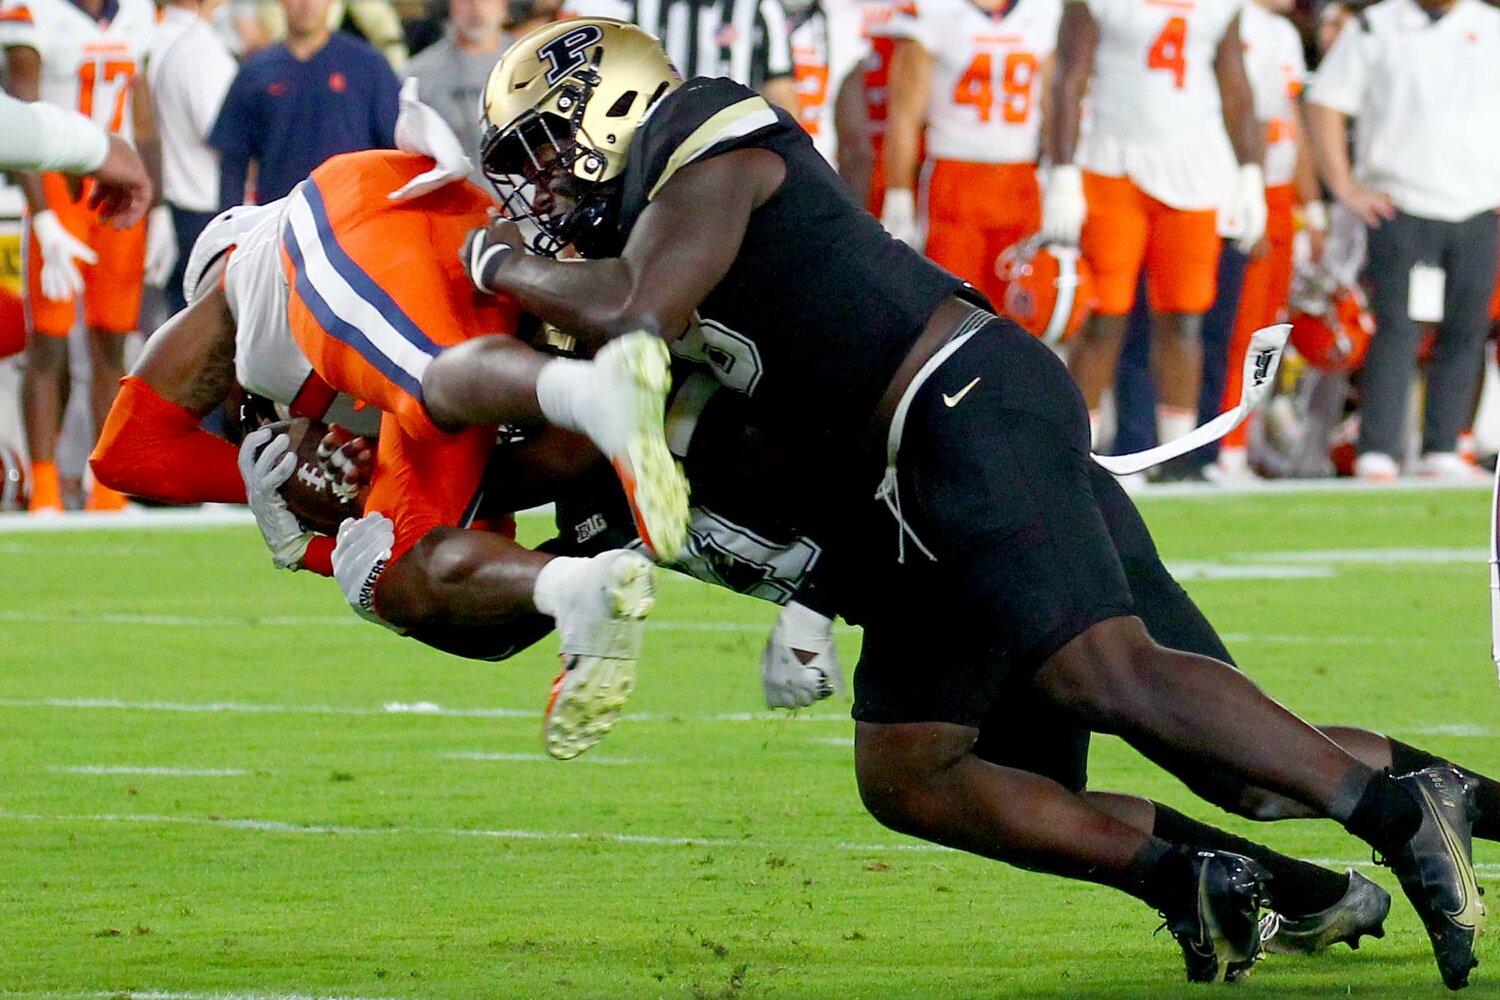 O.C. Brothers (8) and Sanoussi Kane of Purdue - tackling LeQuint Allen Jr of Syracuse